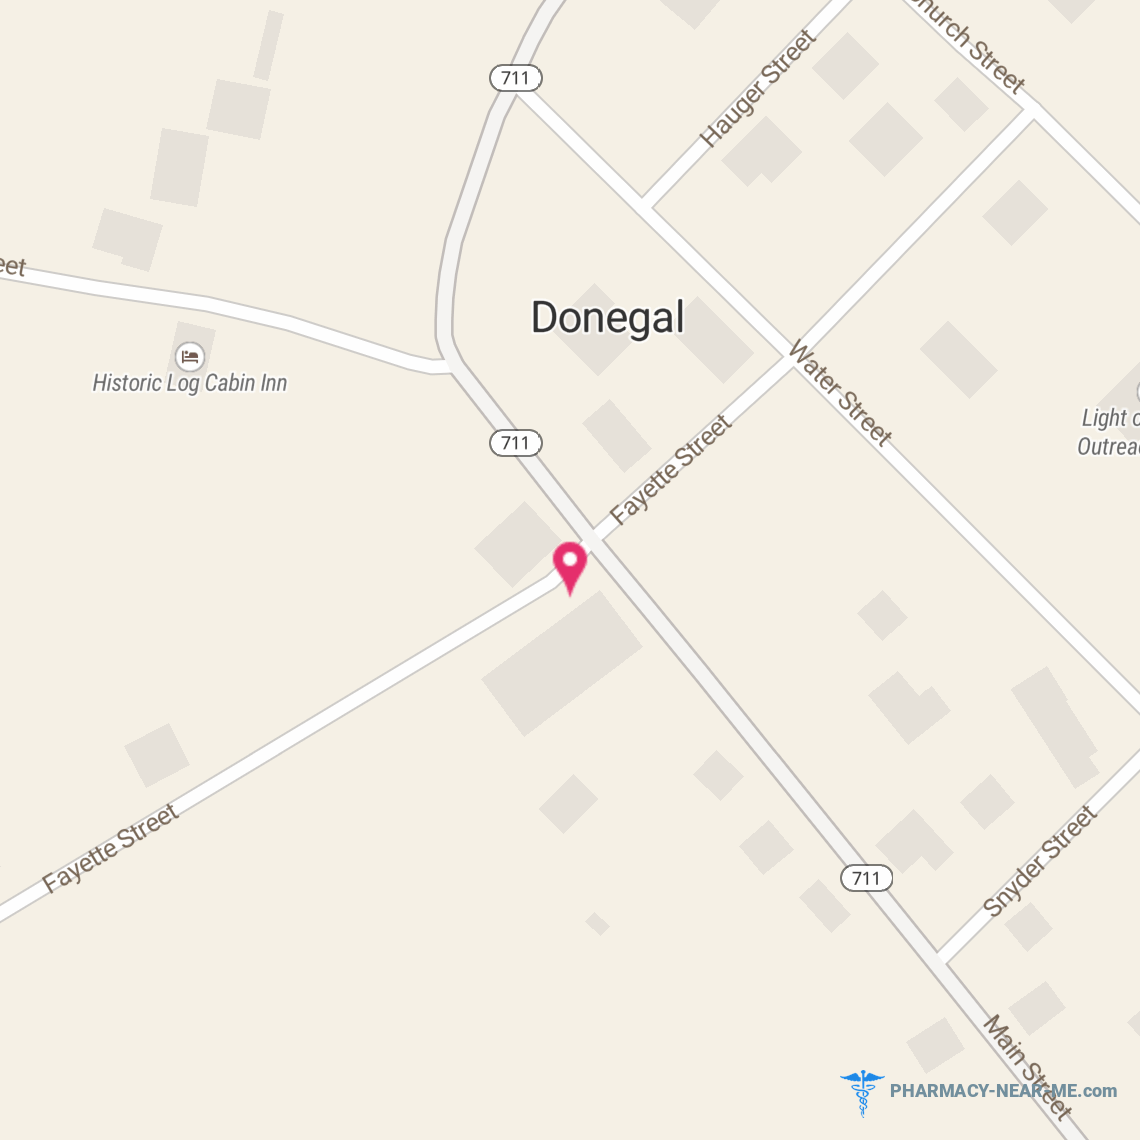 DONEGAL PHARMACY - Pharmacy Hours, Phone, Reviews & Information: 181 Main Street, Donegal, Pennsylvania 15628, United States